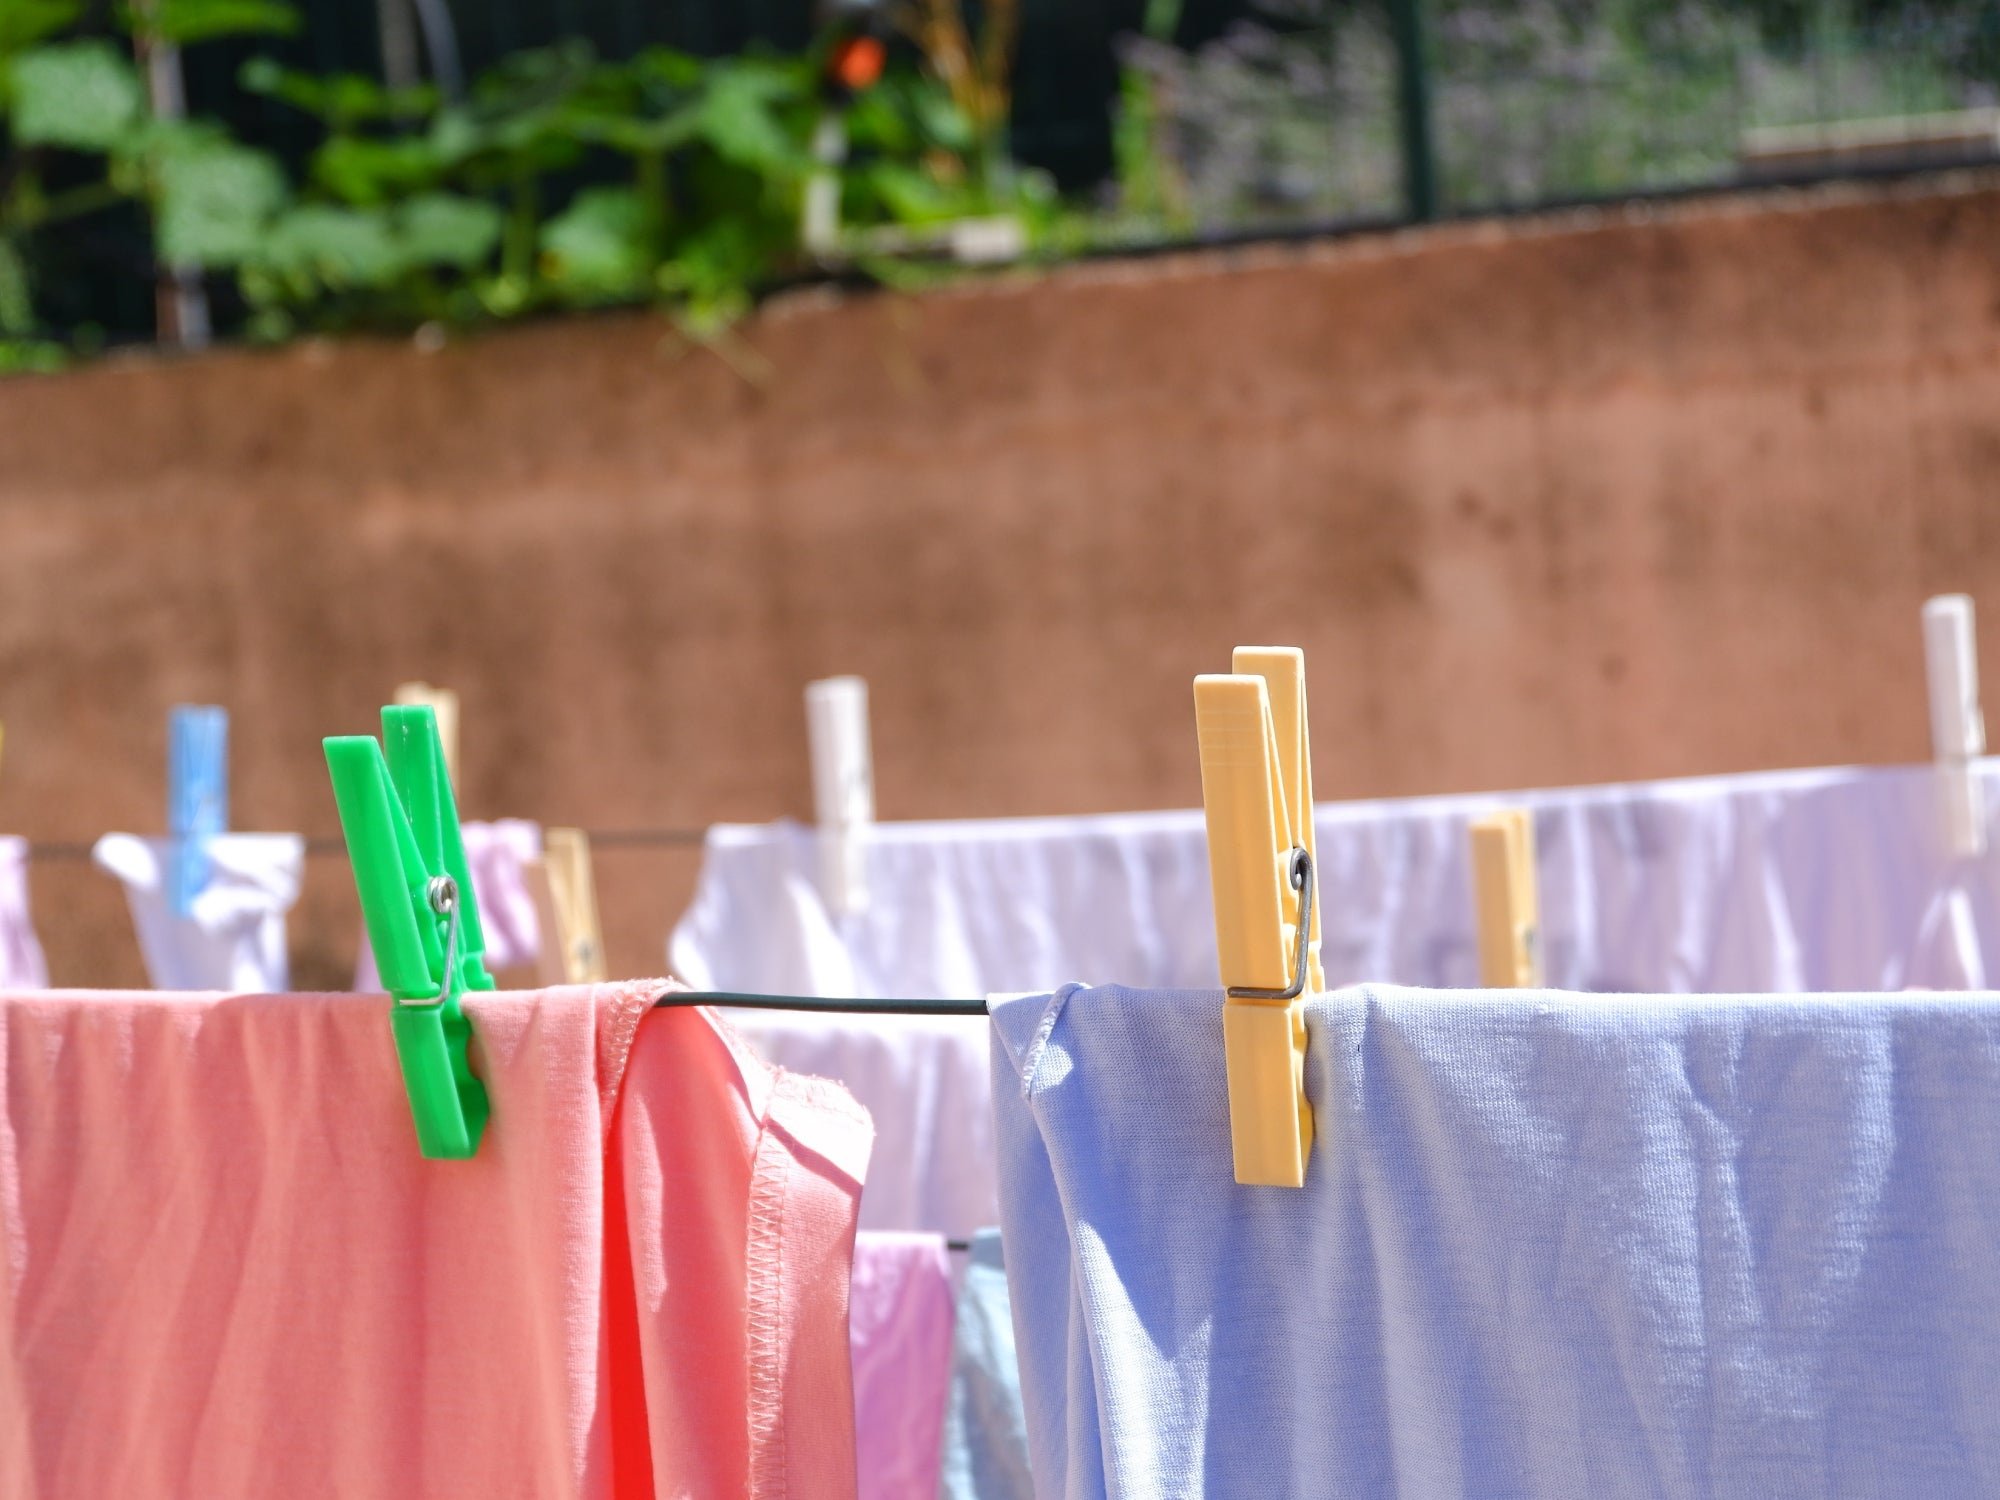 The secret to longer-lasting clothes will also reduce plastic pollution